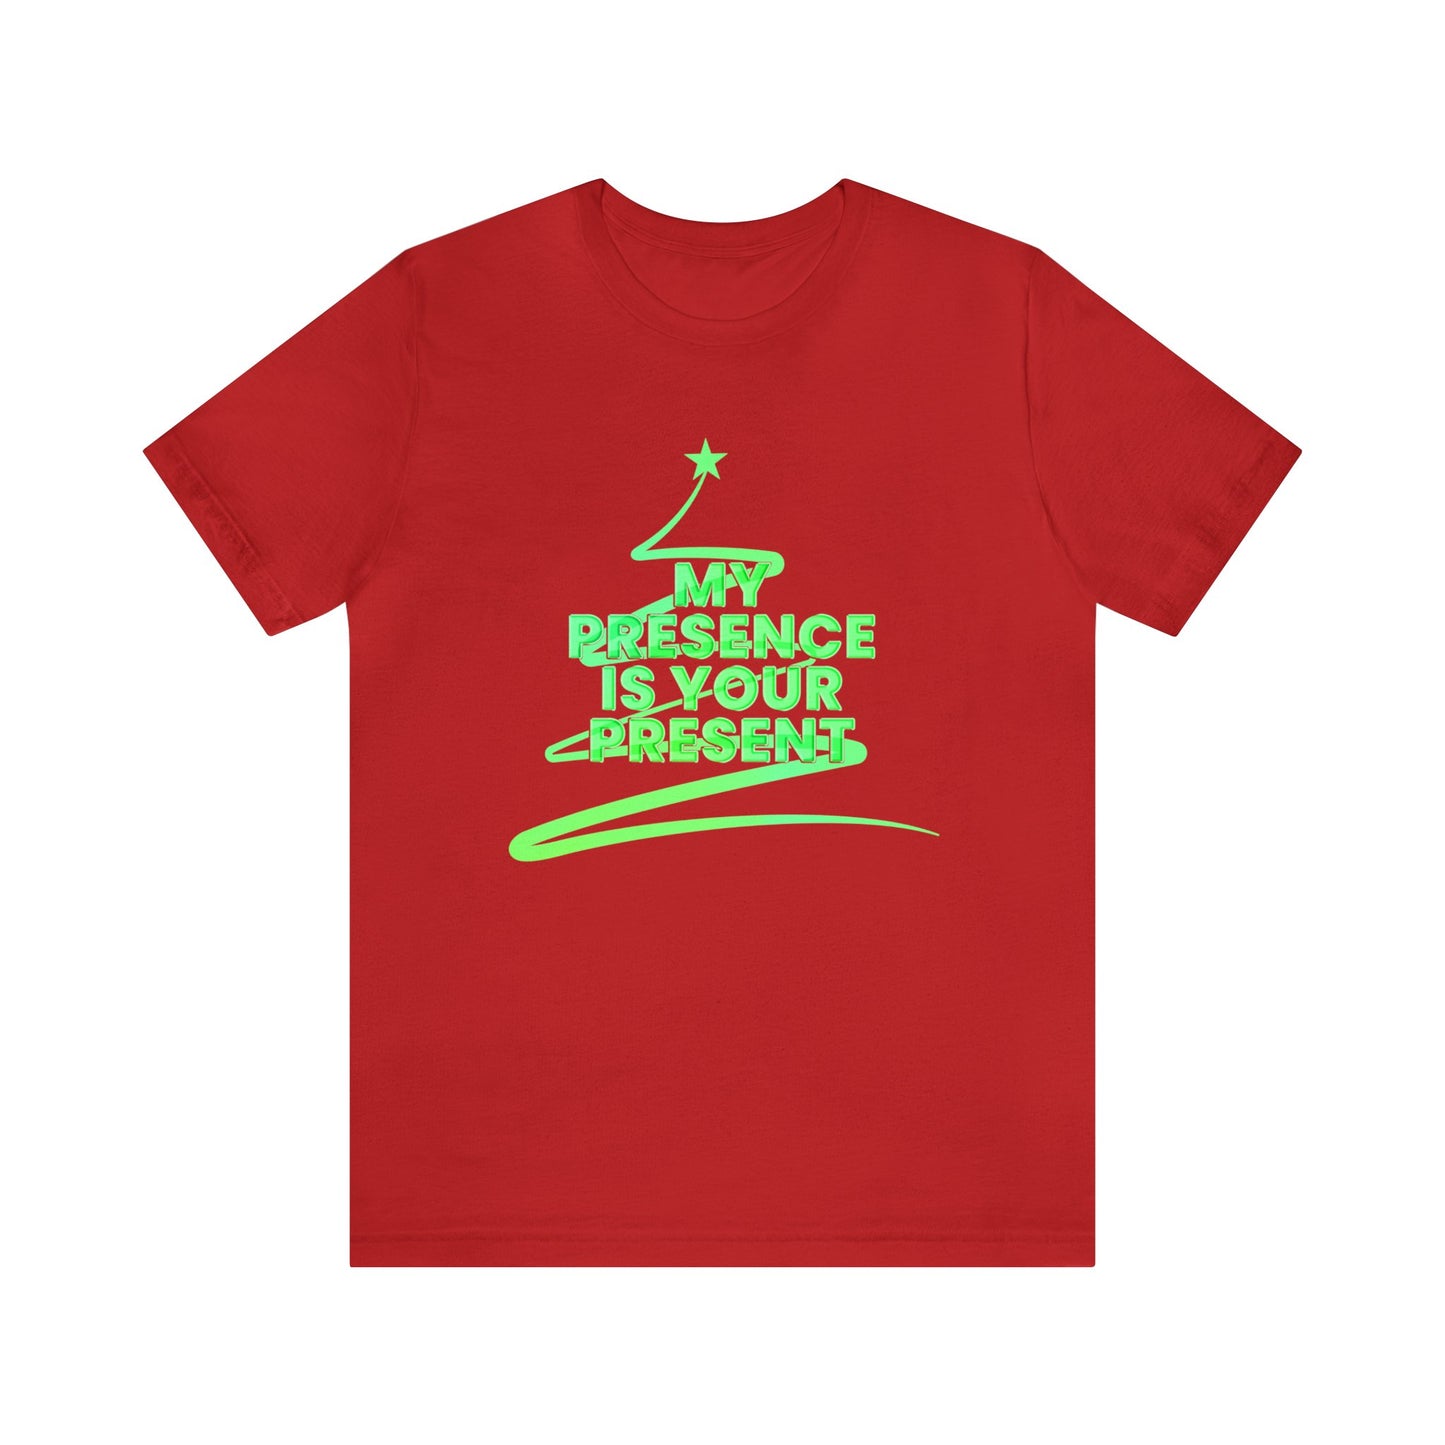 My Presence is Your Present Tee